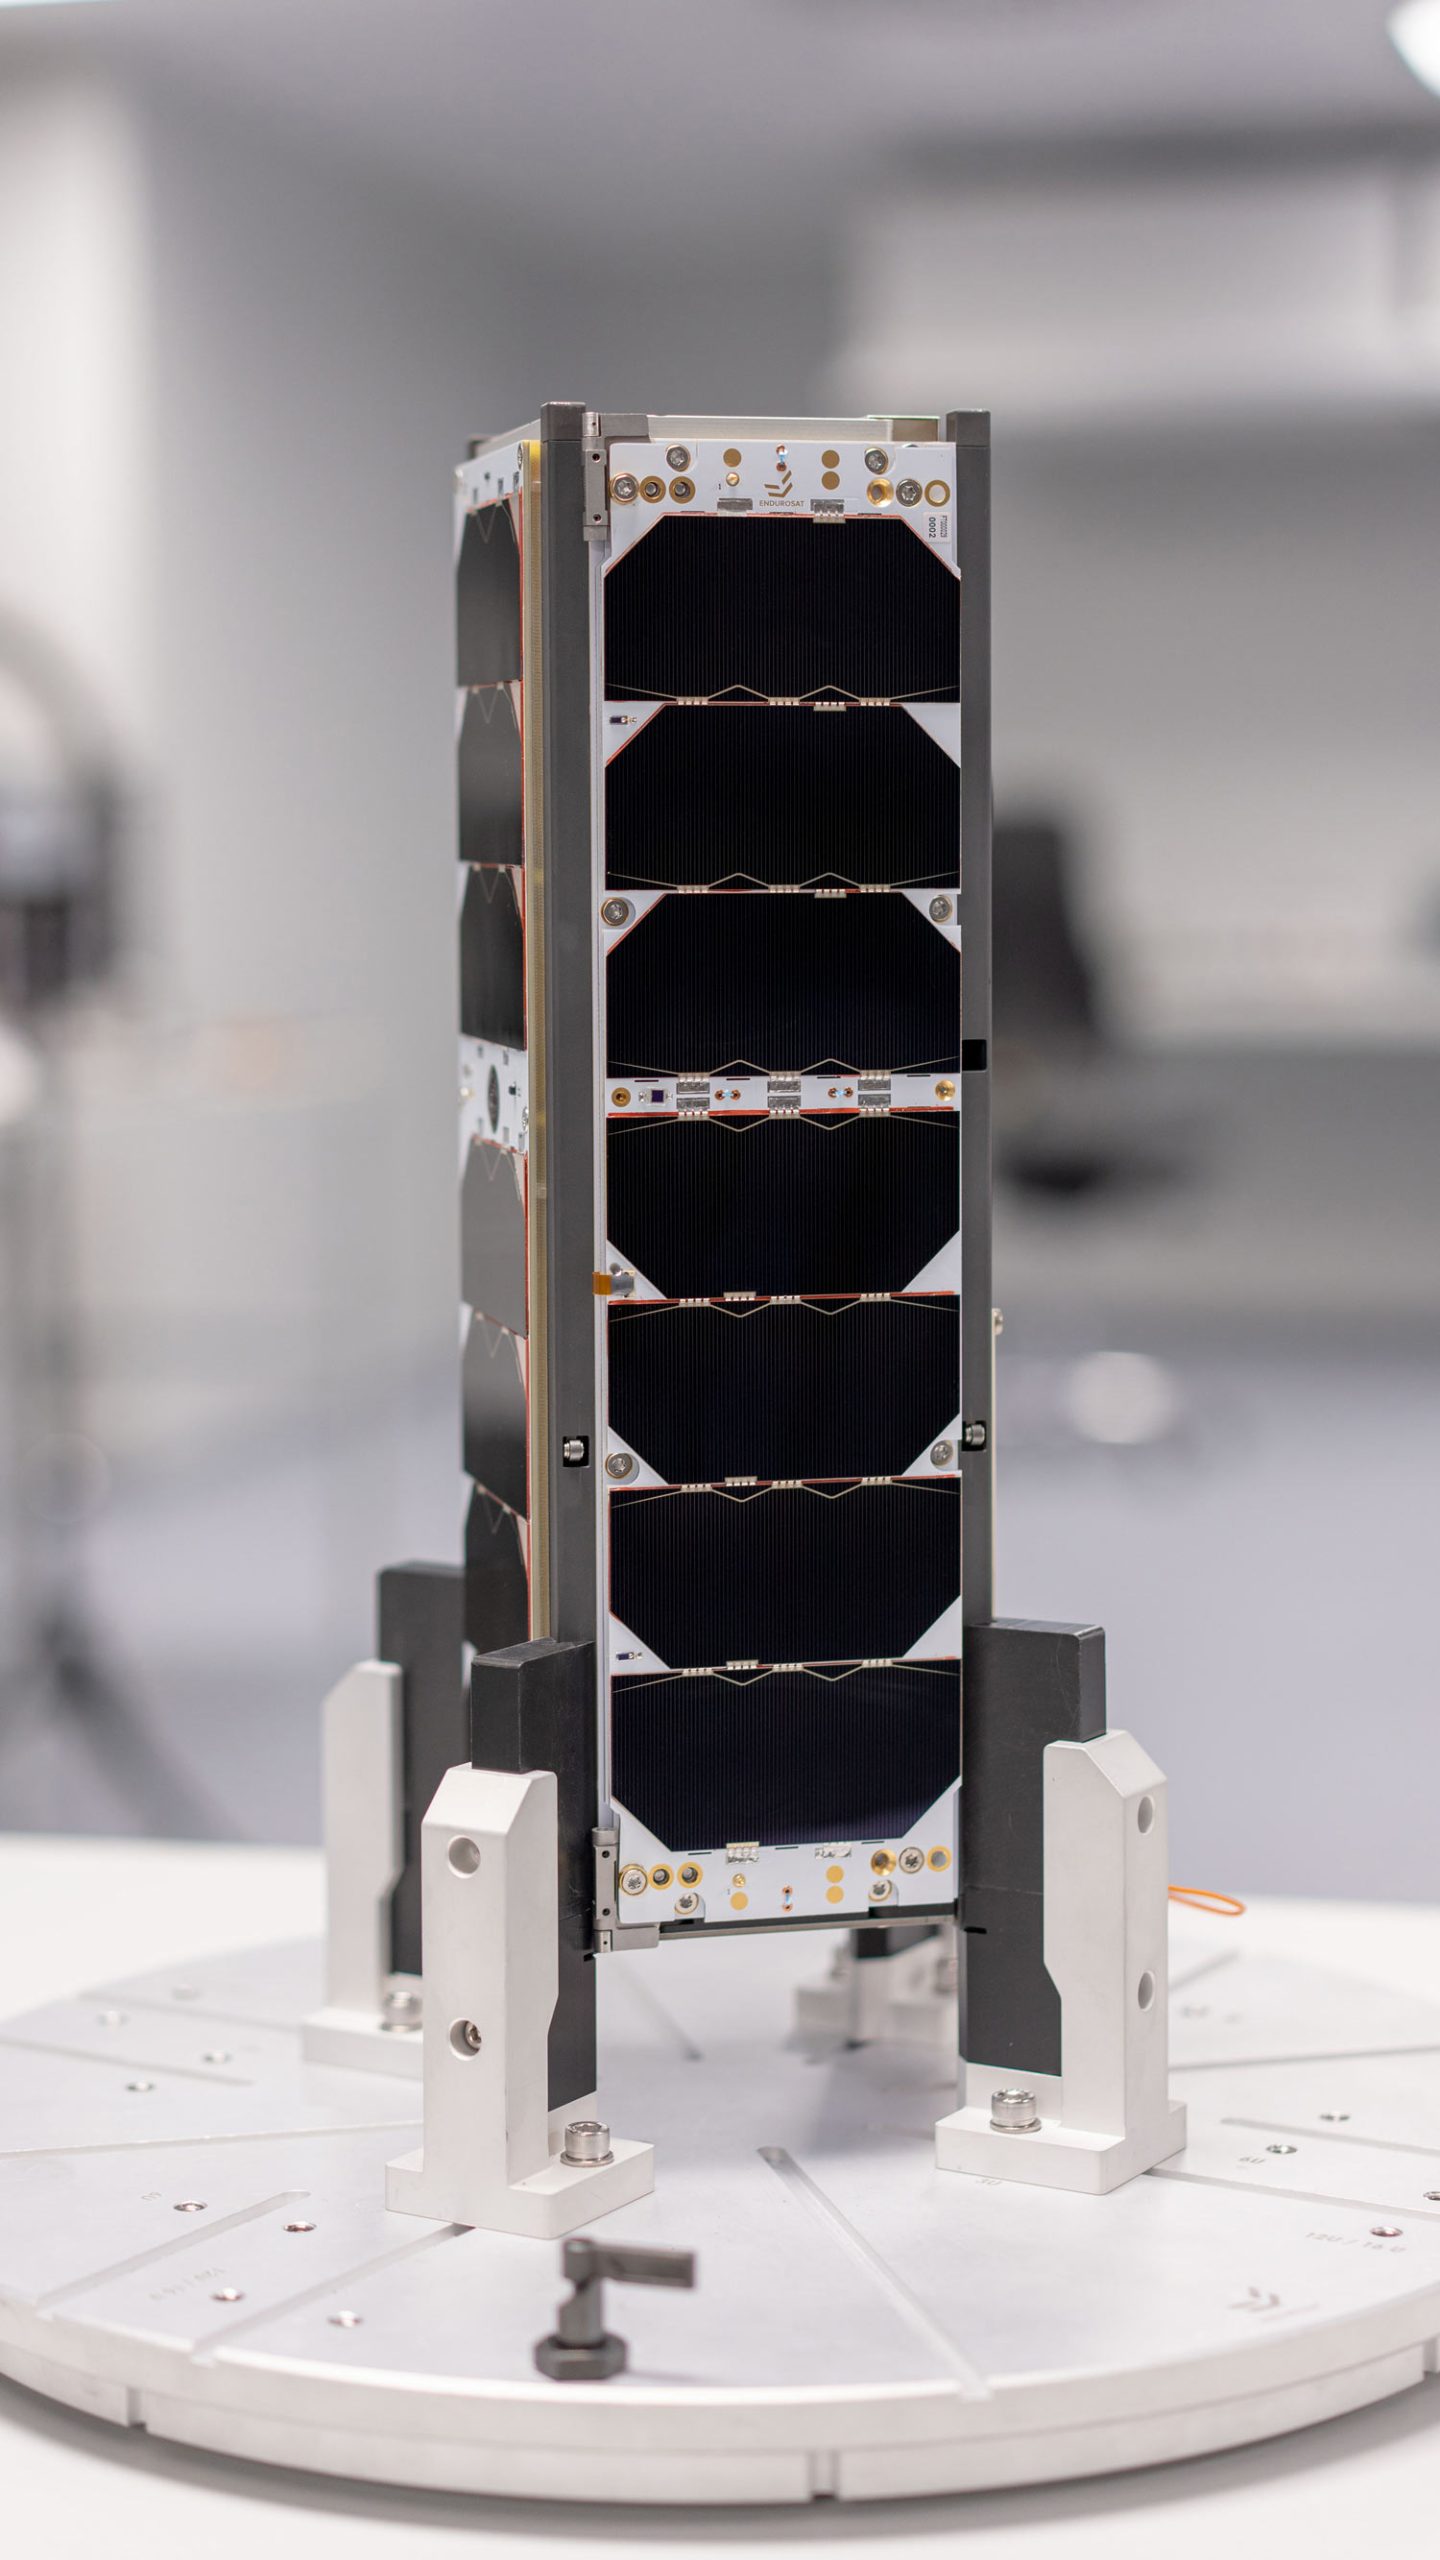 The satellite is the first of what is intended to be a constellation of small earth observation satellites, with subsequent systems expected to be of higher capability. observation satellites, with subsequent systems expected to be of higher capability. | Image: Kenya Space Agency